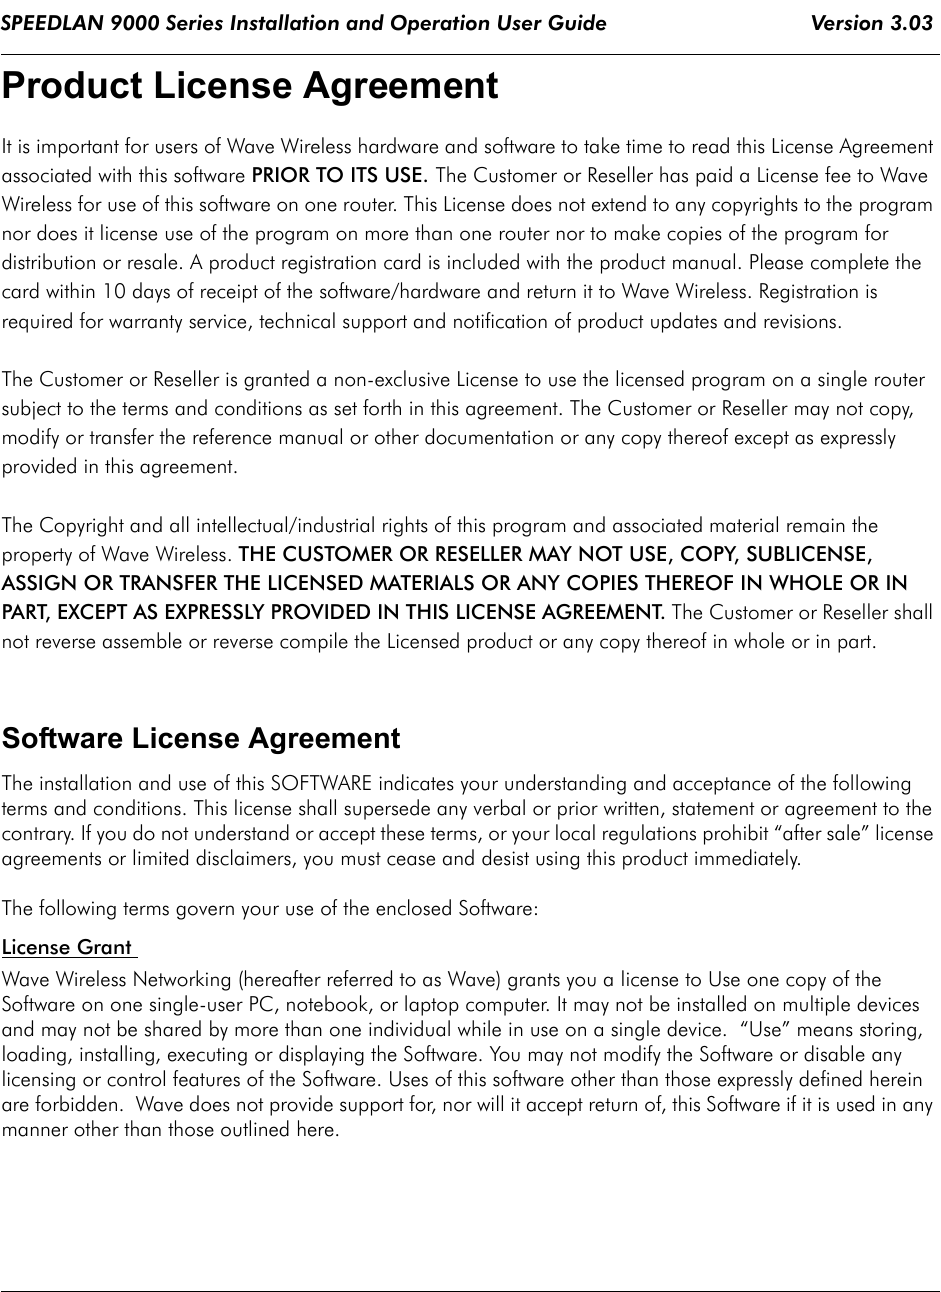 SPEEDLAN 9000 Series Installation and Operation User Guide                                 Version 3.03                                            Product License Agreement It is important for users of Wave Wireless hardware and software to take time to read this License Agreement associated with this software PRIOR TO ITS USE. The Customer or Reseller has paid a License fee to Wave Wireless for use of this software on one router. This License does not extend to any copyrights to the program nor does it license use of the program on more than one router nor to make copies of the program for distribution or resale. A product registration card is included with the product manual. Please complete the card within 10 days of receipt of the software/hardware and return it to Wave Wireless. Registration is required for warranty service, technical support and notification of product updates and revisions.  The Customer or Reseller is granted a non-exclusive License to use the licensed program on a single router subject to the terms and conditions as set forth in this agreement. The Customer or Reseller may not copy, modify or transfer the reference manual or other documentation or any copy thereof except as expressly provided in this agreement. The Copyright and all intellectual/industrial rights of this program and associated material remain the property of Wave Wireless. THE CUSTOMER OR RESELLER MAY NOT USE, COPY, SUBLICENSE, ASSIGN OR TRANSFER THE LICENSED MATERIALS OR ANY COPIES THEREOF IN WHOLE OR IN PART, EXCEPT AS EXPRESSLY PROVIDED IN THIS LICENSE AGREEMENT. The Customer or Reseller shall not reverse assemble or reverse compile the Licensed product or any copy thereof in whole or in part. Software License AgreementThe installation and use of this SOFTWARE indicates your understanding and acceptance of the following terms and conditions. This license shall supersede any verbal or prior written, statement or agreement to the contrary. If you do not understand or accept these terms, or your local regulations prohibit “after sale” license agreements or limited disclaimers, you must cease and desist using this product immediately. The following terms govern your use of the enclosed Software:License Grant Wave Wireless Networking (hereafter referred to as Wave) grants you a license to Use one copy of the Software on one single-user PC, notebook, or laptop computer. It may not be installed on multiple devices and may not be shared by more than one individual while in use on a single device.  “Use” means storing, loading, installing, executing or displaying the Software. You may not modify the Software or disable any licensing or control features of the Software. Uses of this software other than those expressly defined herein are forbidden.  Wave does not provide support for, nor will it accept return of, this Software if it is used in any manner other than those outlined here.             